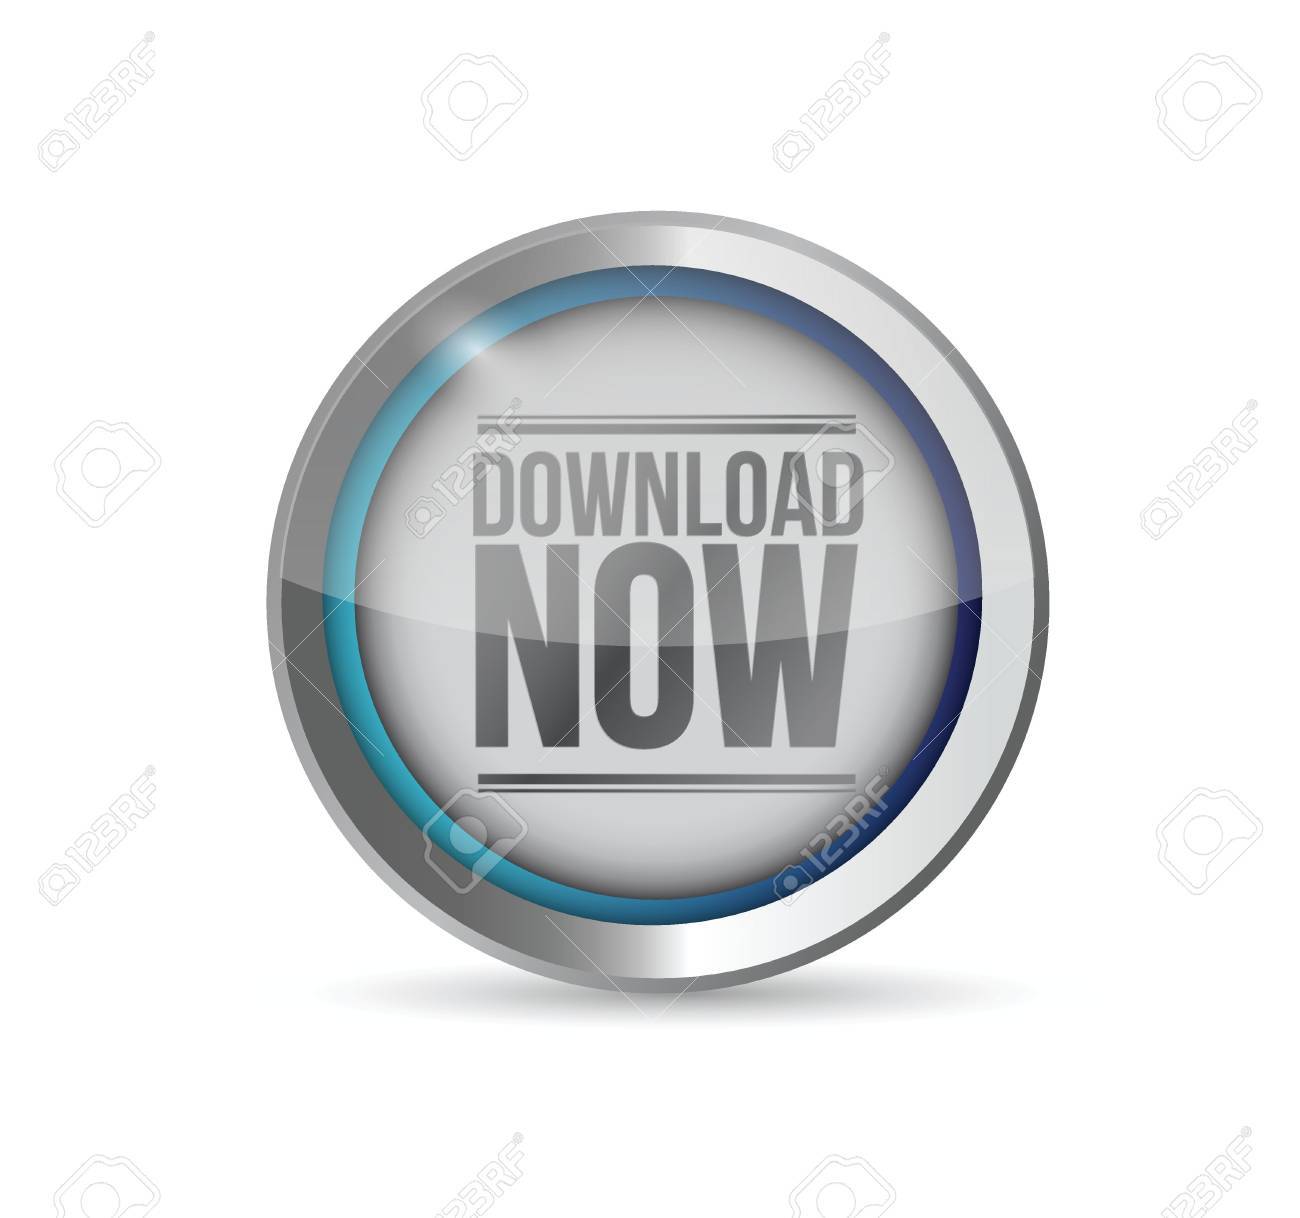 stylish Download now button. illustration design graphic Stock Vector -  20387301